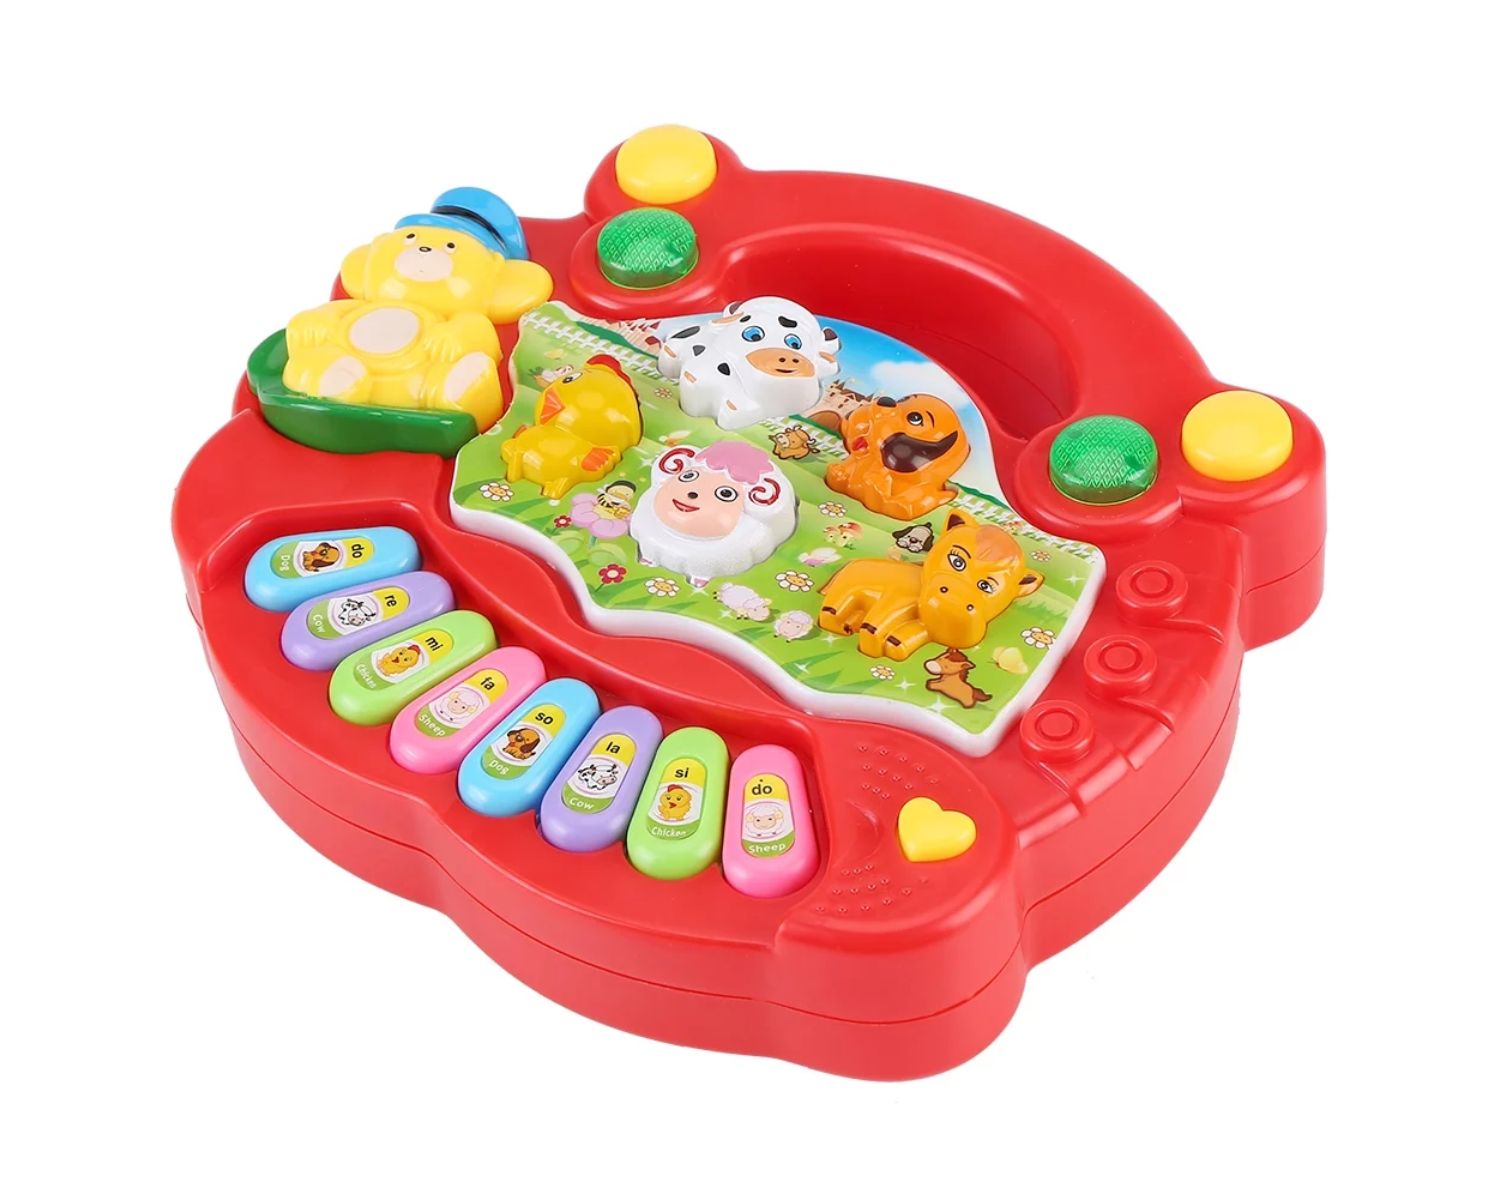 Review: Top Musical Toys for Kids